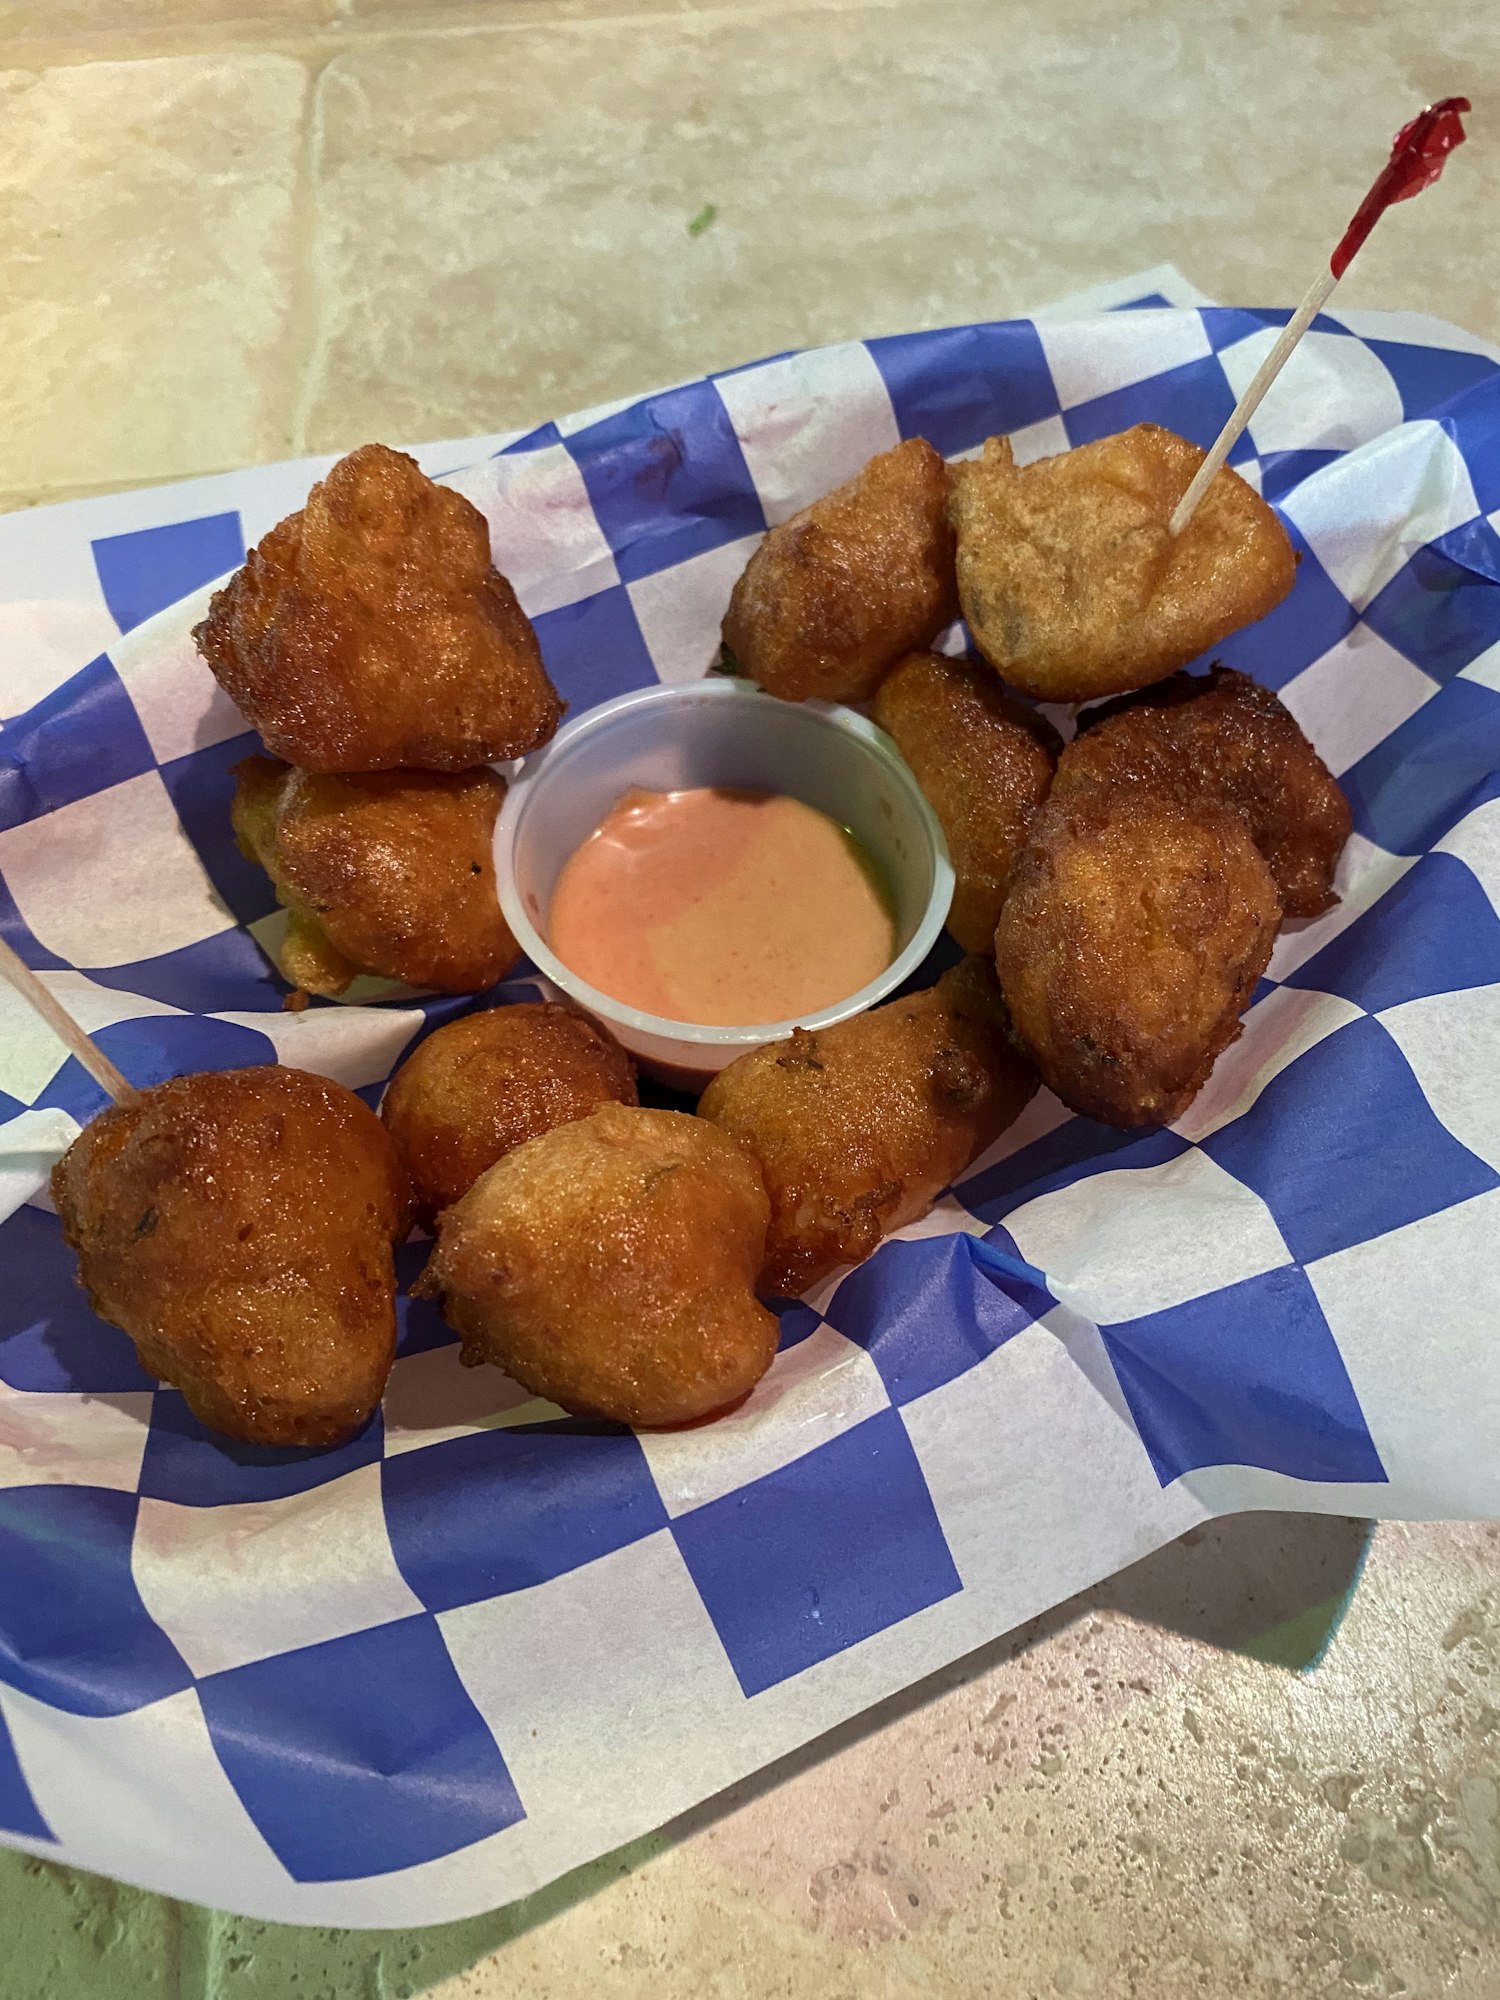 A bowl of conch fritters sitting on a blue and white paper lining